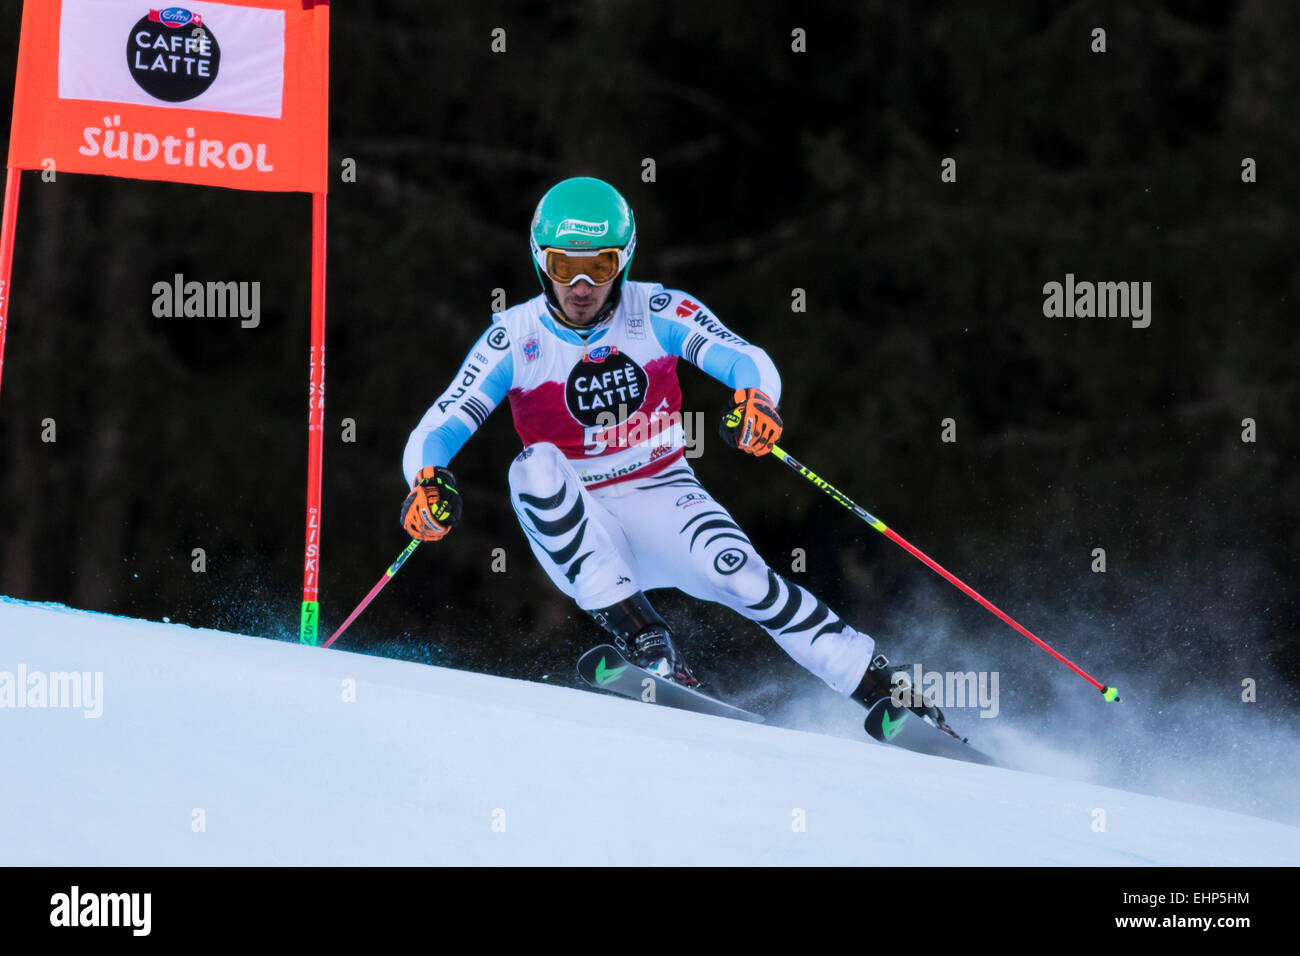 Val Badia, Italy 21 December 2014. NEUREUTHER Felix (Ger) competing in the Audi Fis Alpine Skiing World Cup Men’s Giant Slalom Stock Photo